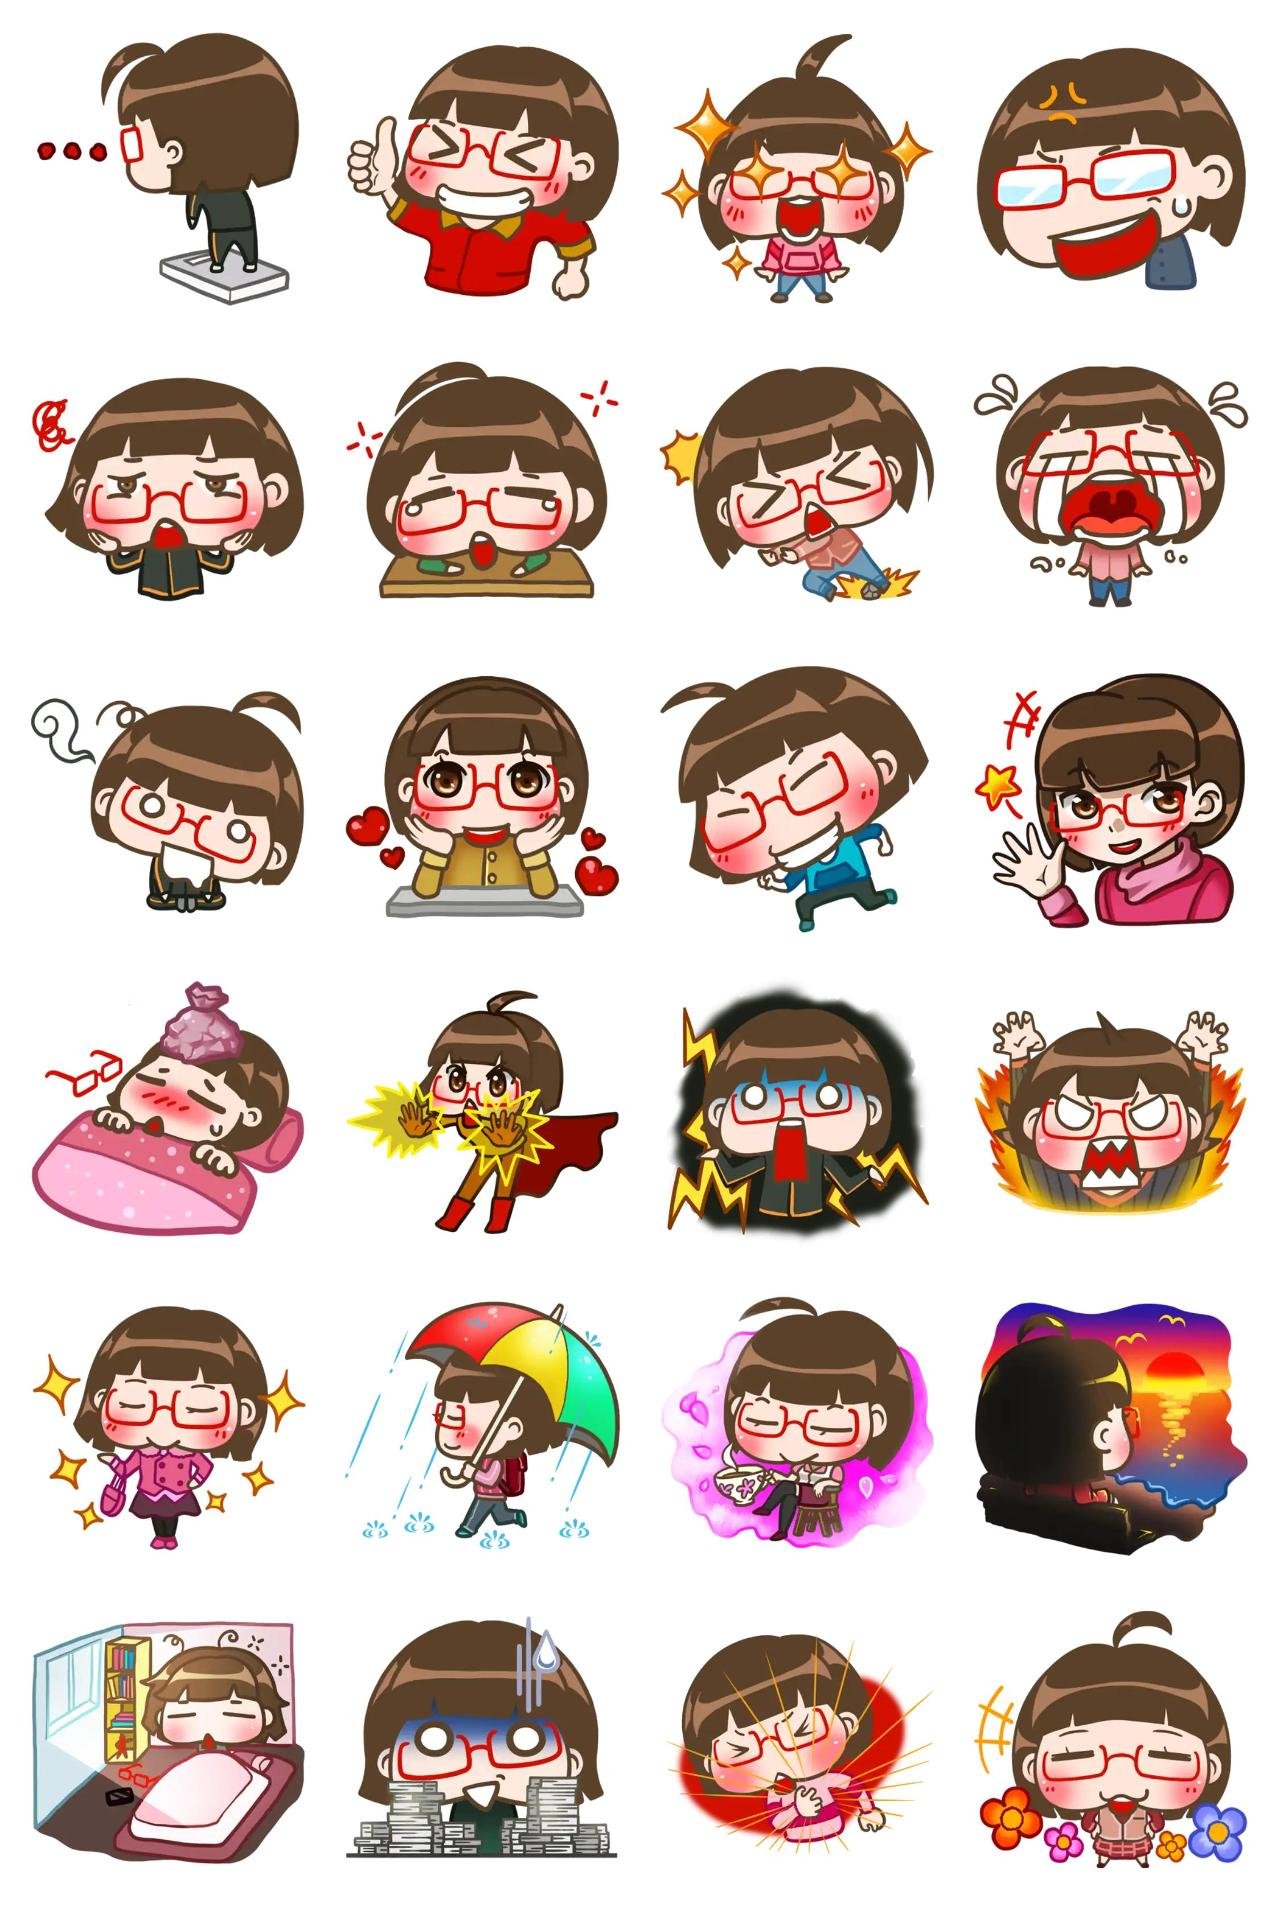 Lovely girl always happy Animation/Cartoon,People sticker pack for Whatsapp, Telegram, Signal, and others chatting and message apps